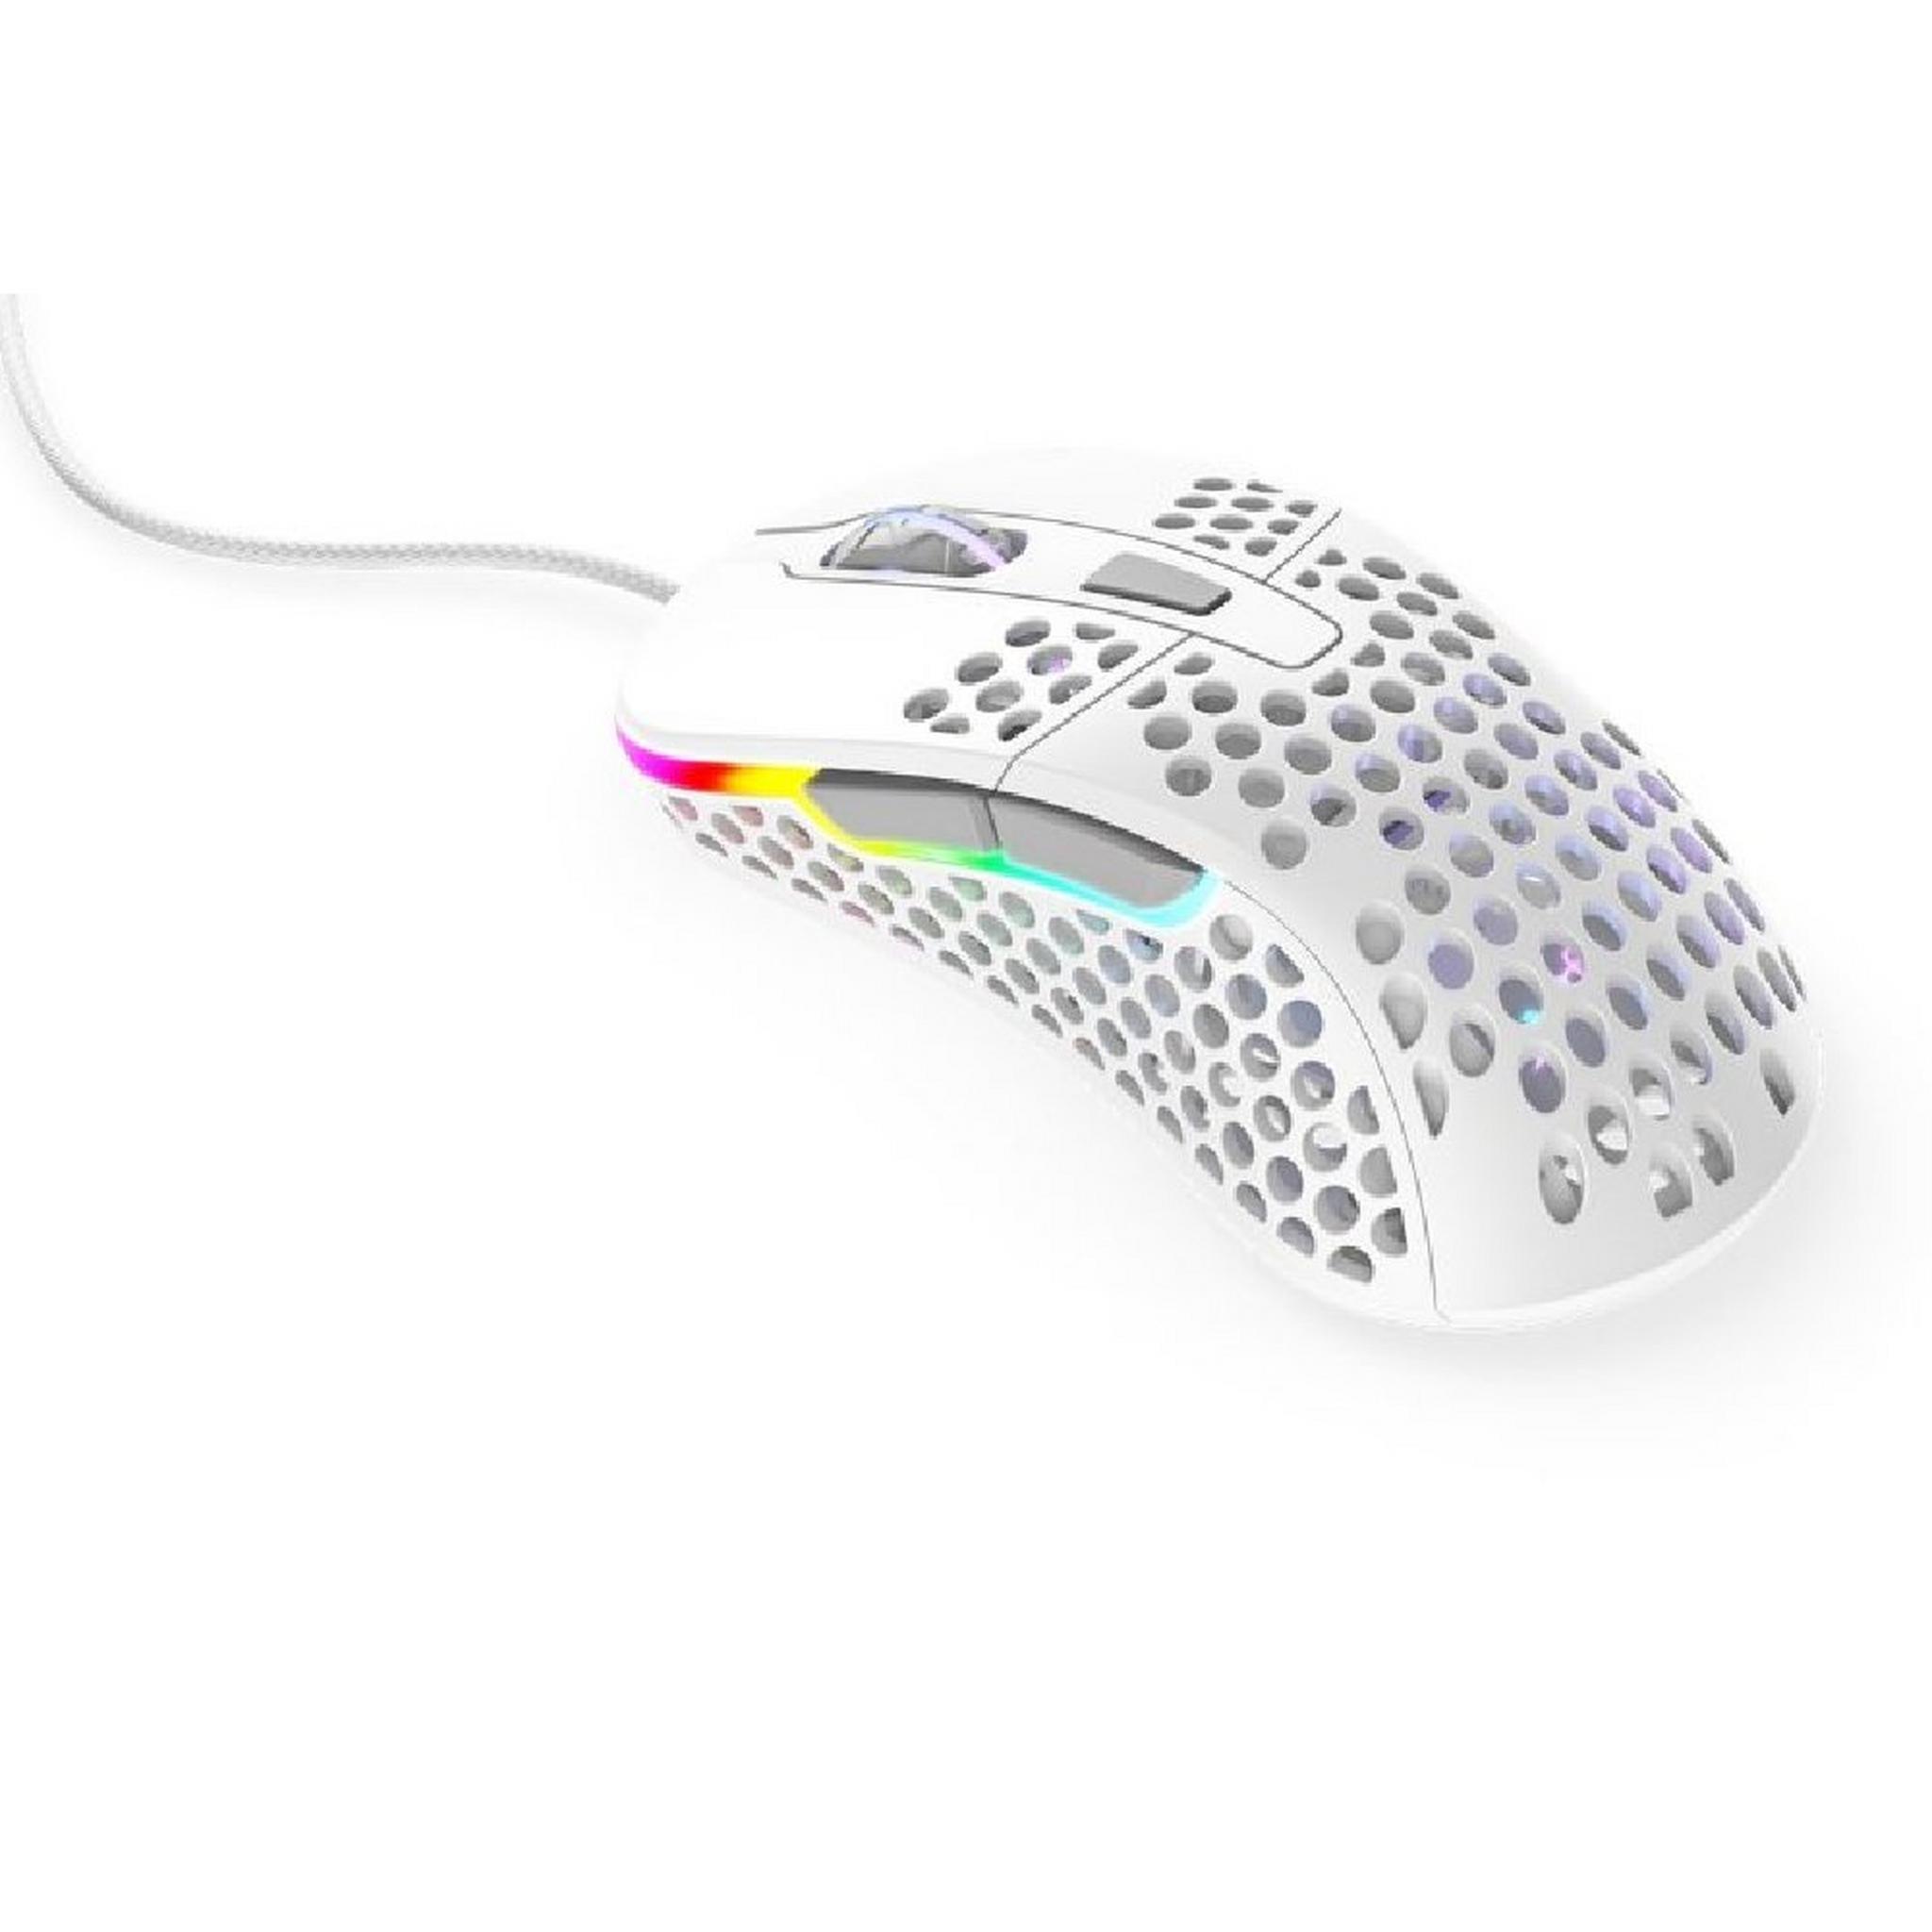 Xtrfy M4 RGB Wired Mouse - White